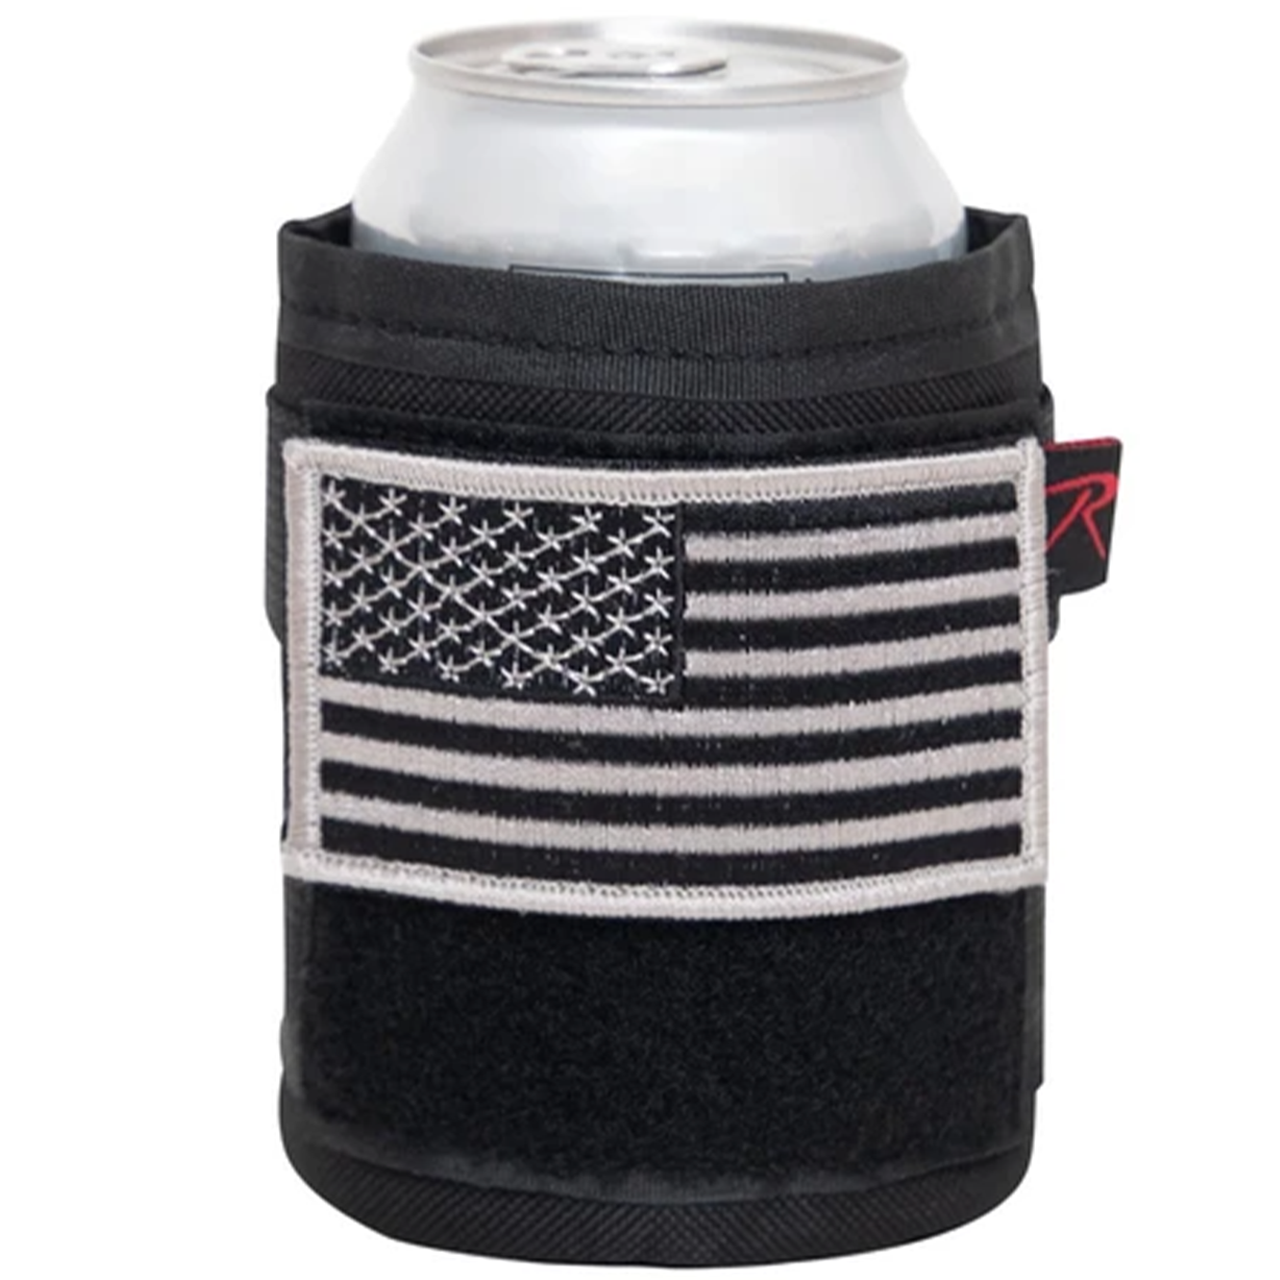 https://cdn11.bigcommerce.com/s-kduut7oy74/images/stencil/1280x1280/products/855/2443/Rothco_Tact_Koozie_BLK_2__74884.1640204437.png?c=1